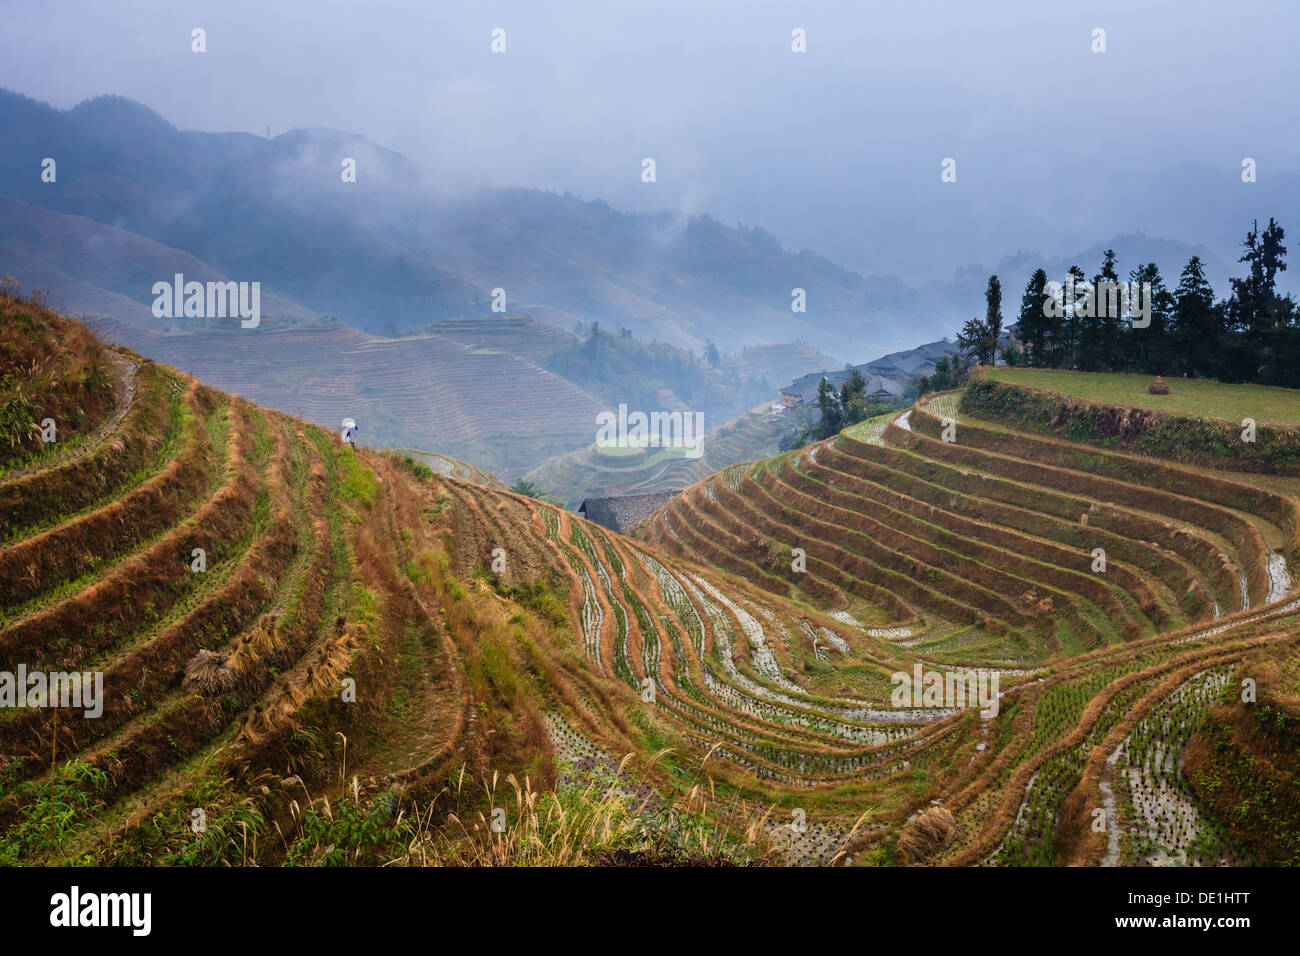 Famous 500 year old contoured rice terraces on the misty mountain slops of Longsheng, China, tended by hand in traditional way Stock Photo